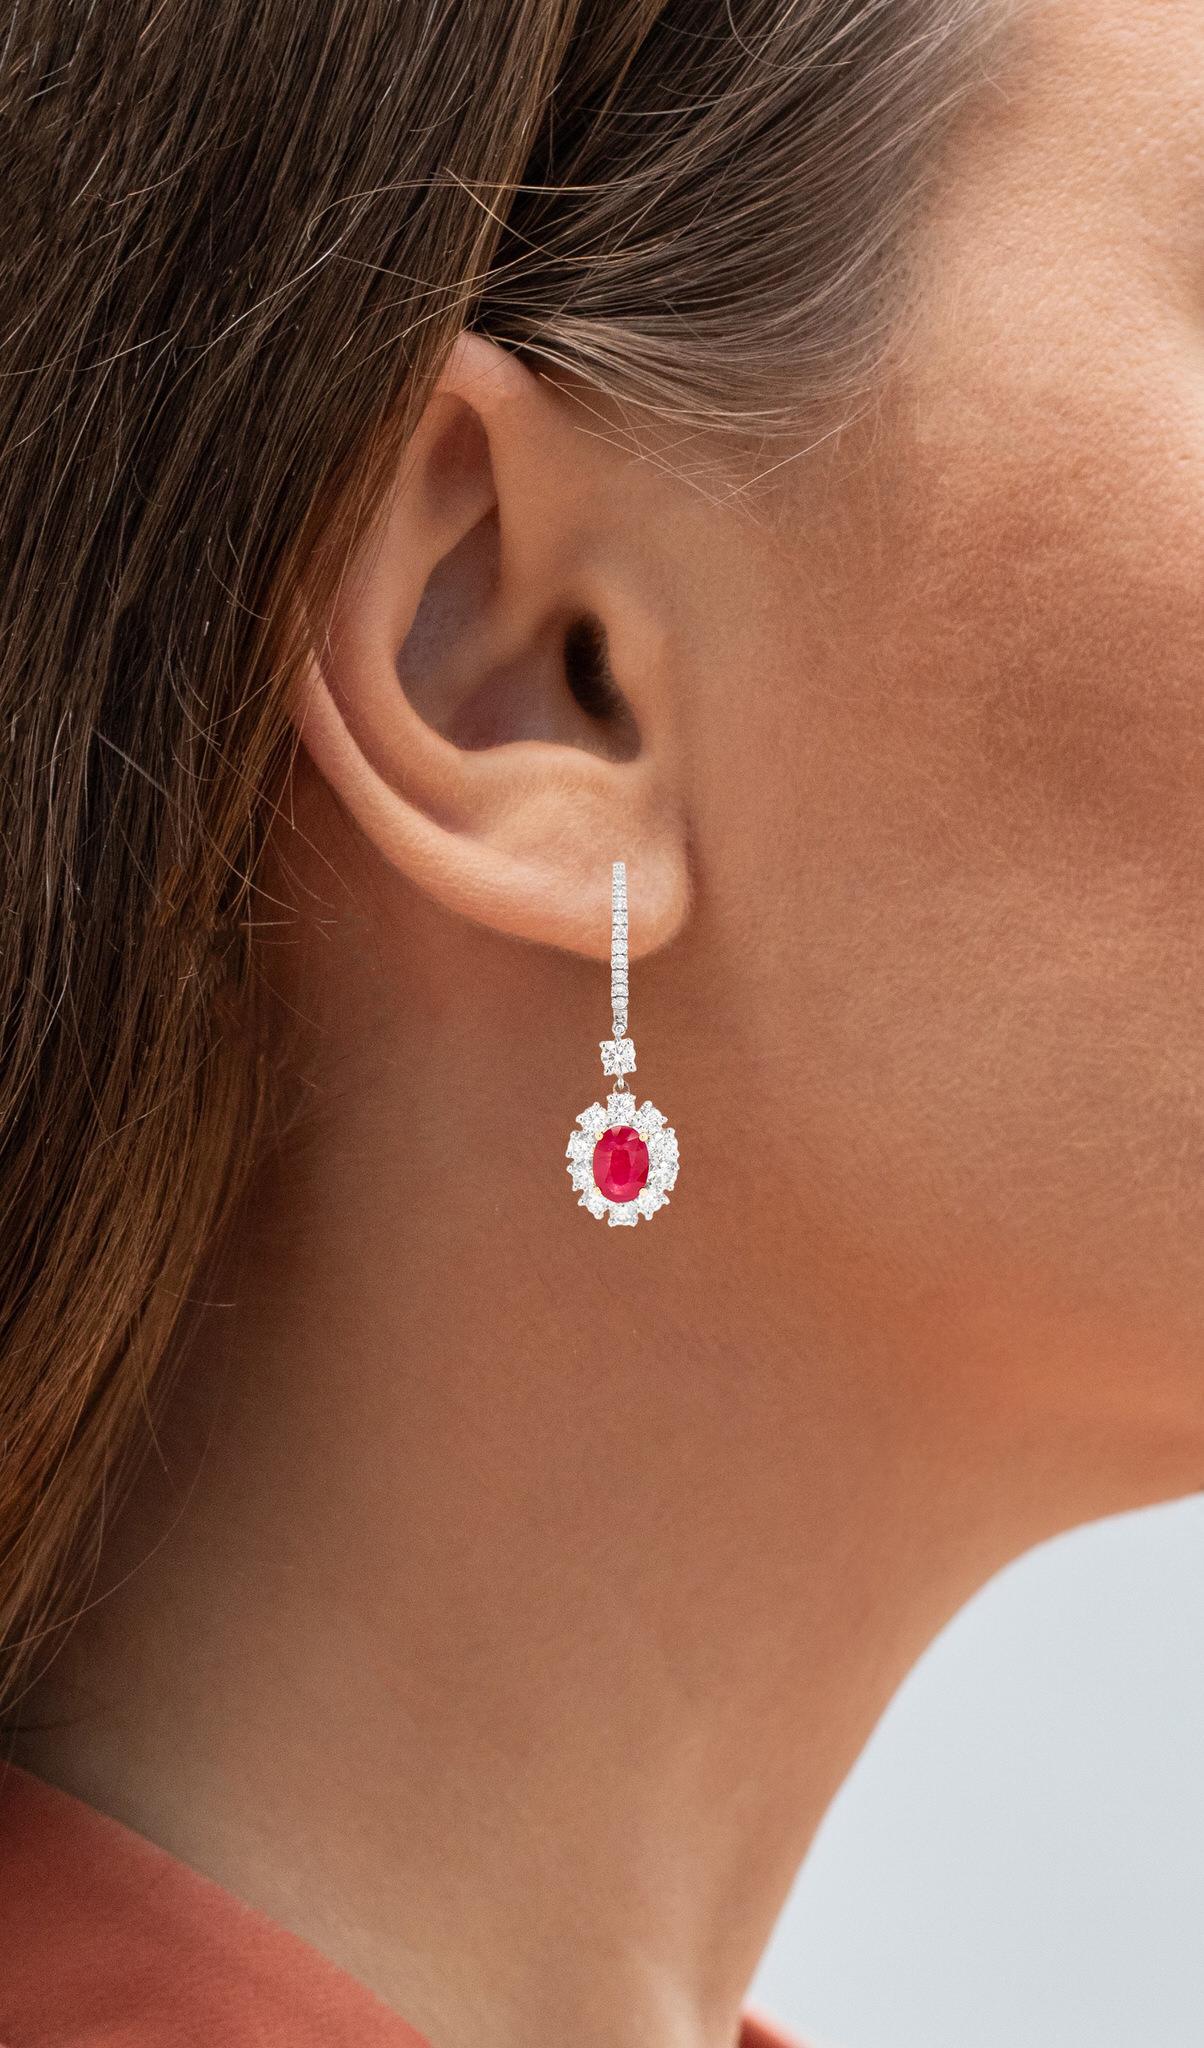 It comes with the Gemological Appraisal by GIA GG/AJP
All Gemstones are Natural
Rubies = 2.36 Carats
Diamonds = 1,81 Carats
Metal: 18K White Gold
Dimensions: 32 x 10 mm